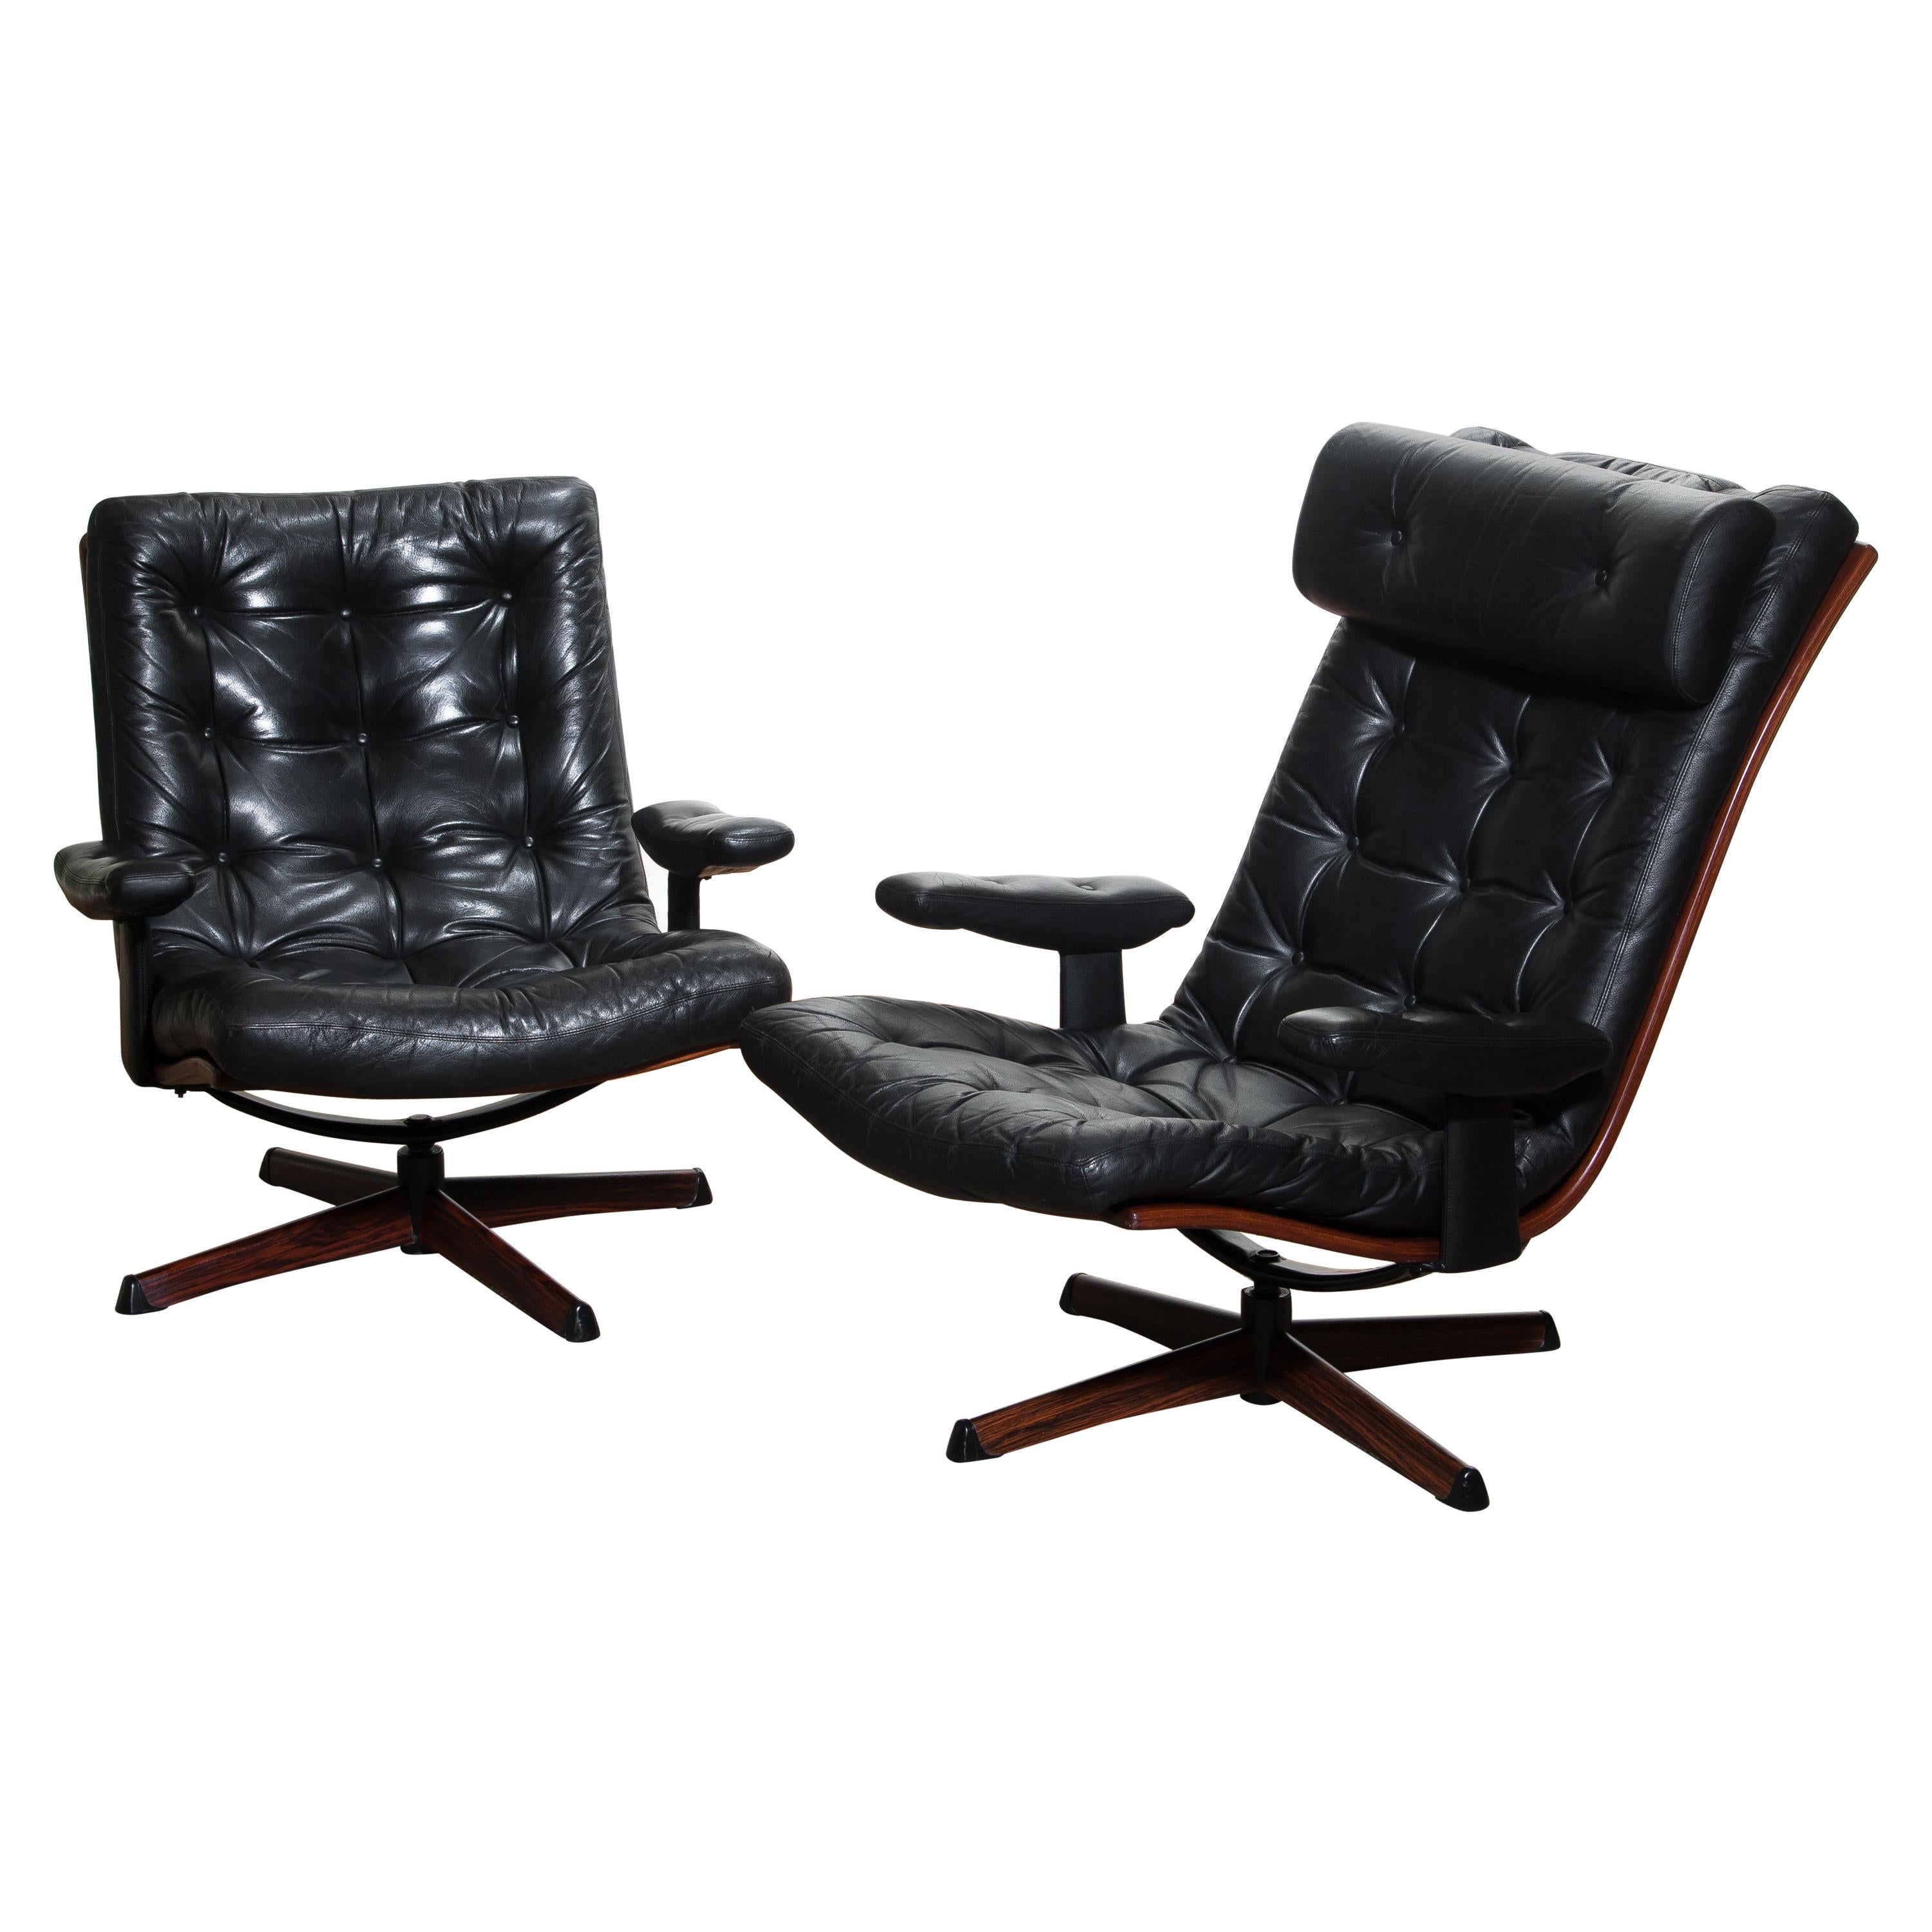 Beautiful set of two extremely comfortable and matching swivel chairs by Gote Design Nassjo, Sweden, 1960
The metal swivel stands are covered with an Jacaranda print.
The chairs are upholstered with black sturdy leather and all in perfect